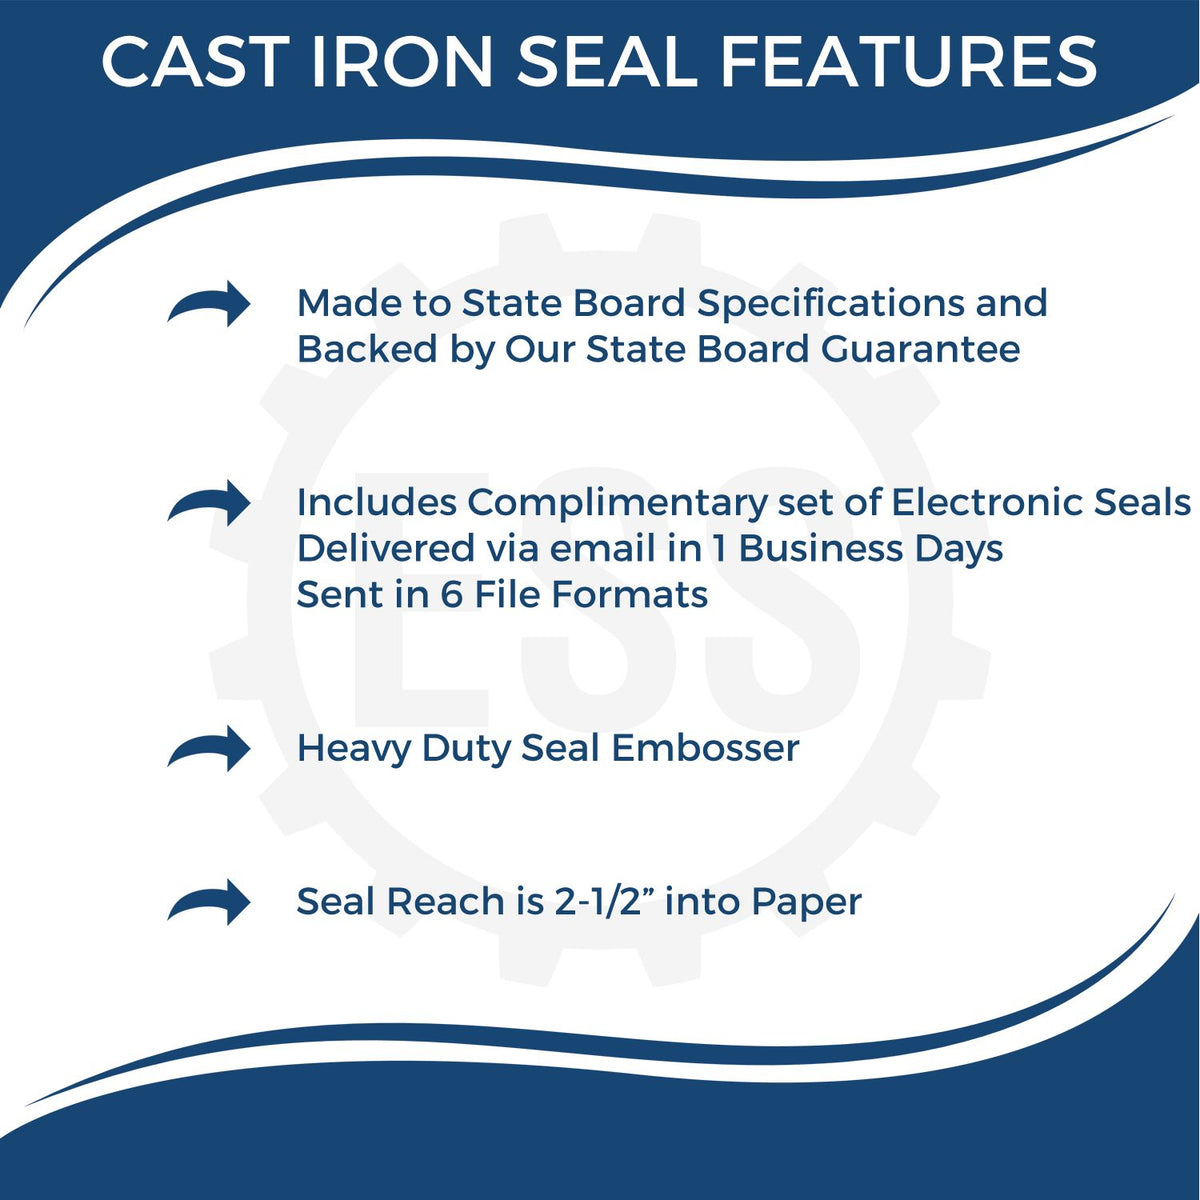 A picture of an infographic highlighting the selling points for the Heavy Duty Cast Iron Maryland Engineer Seal Embosser